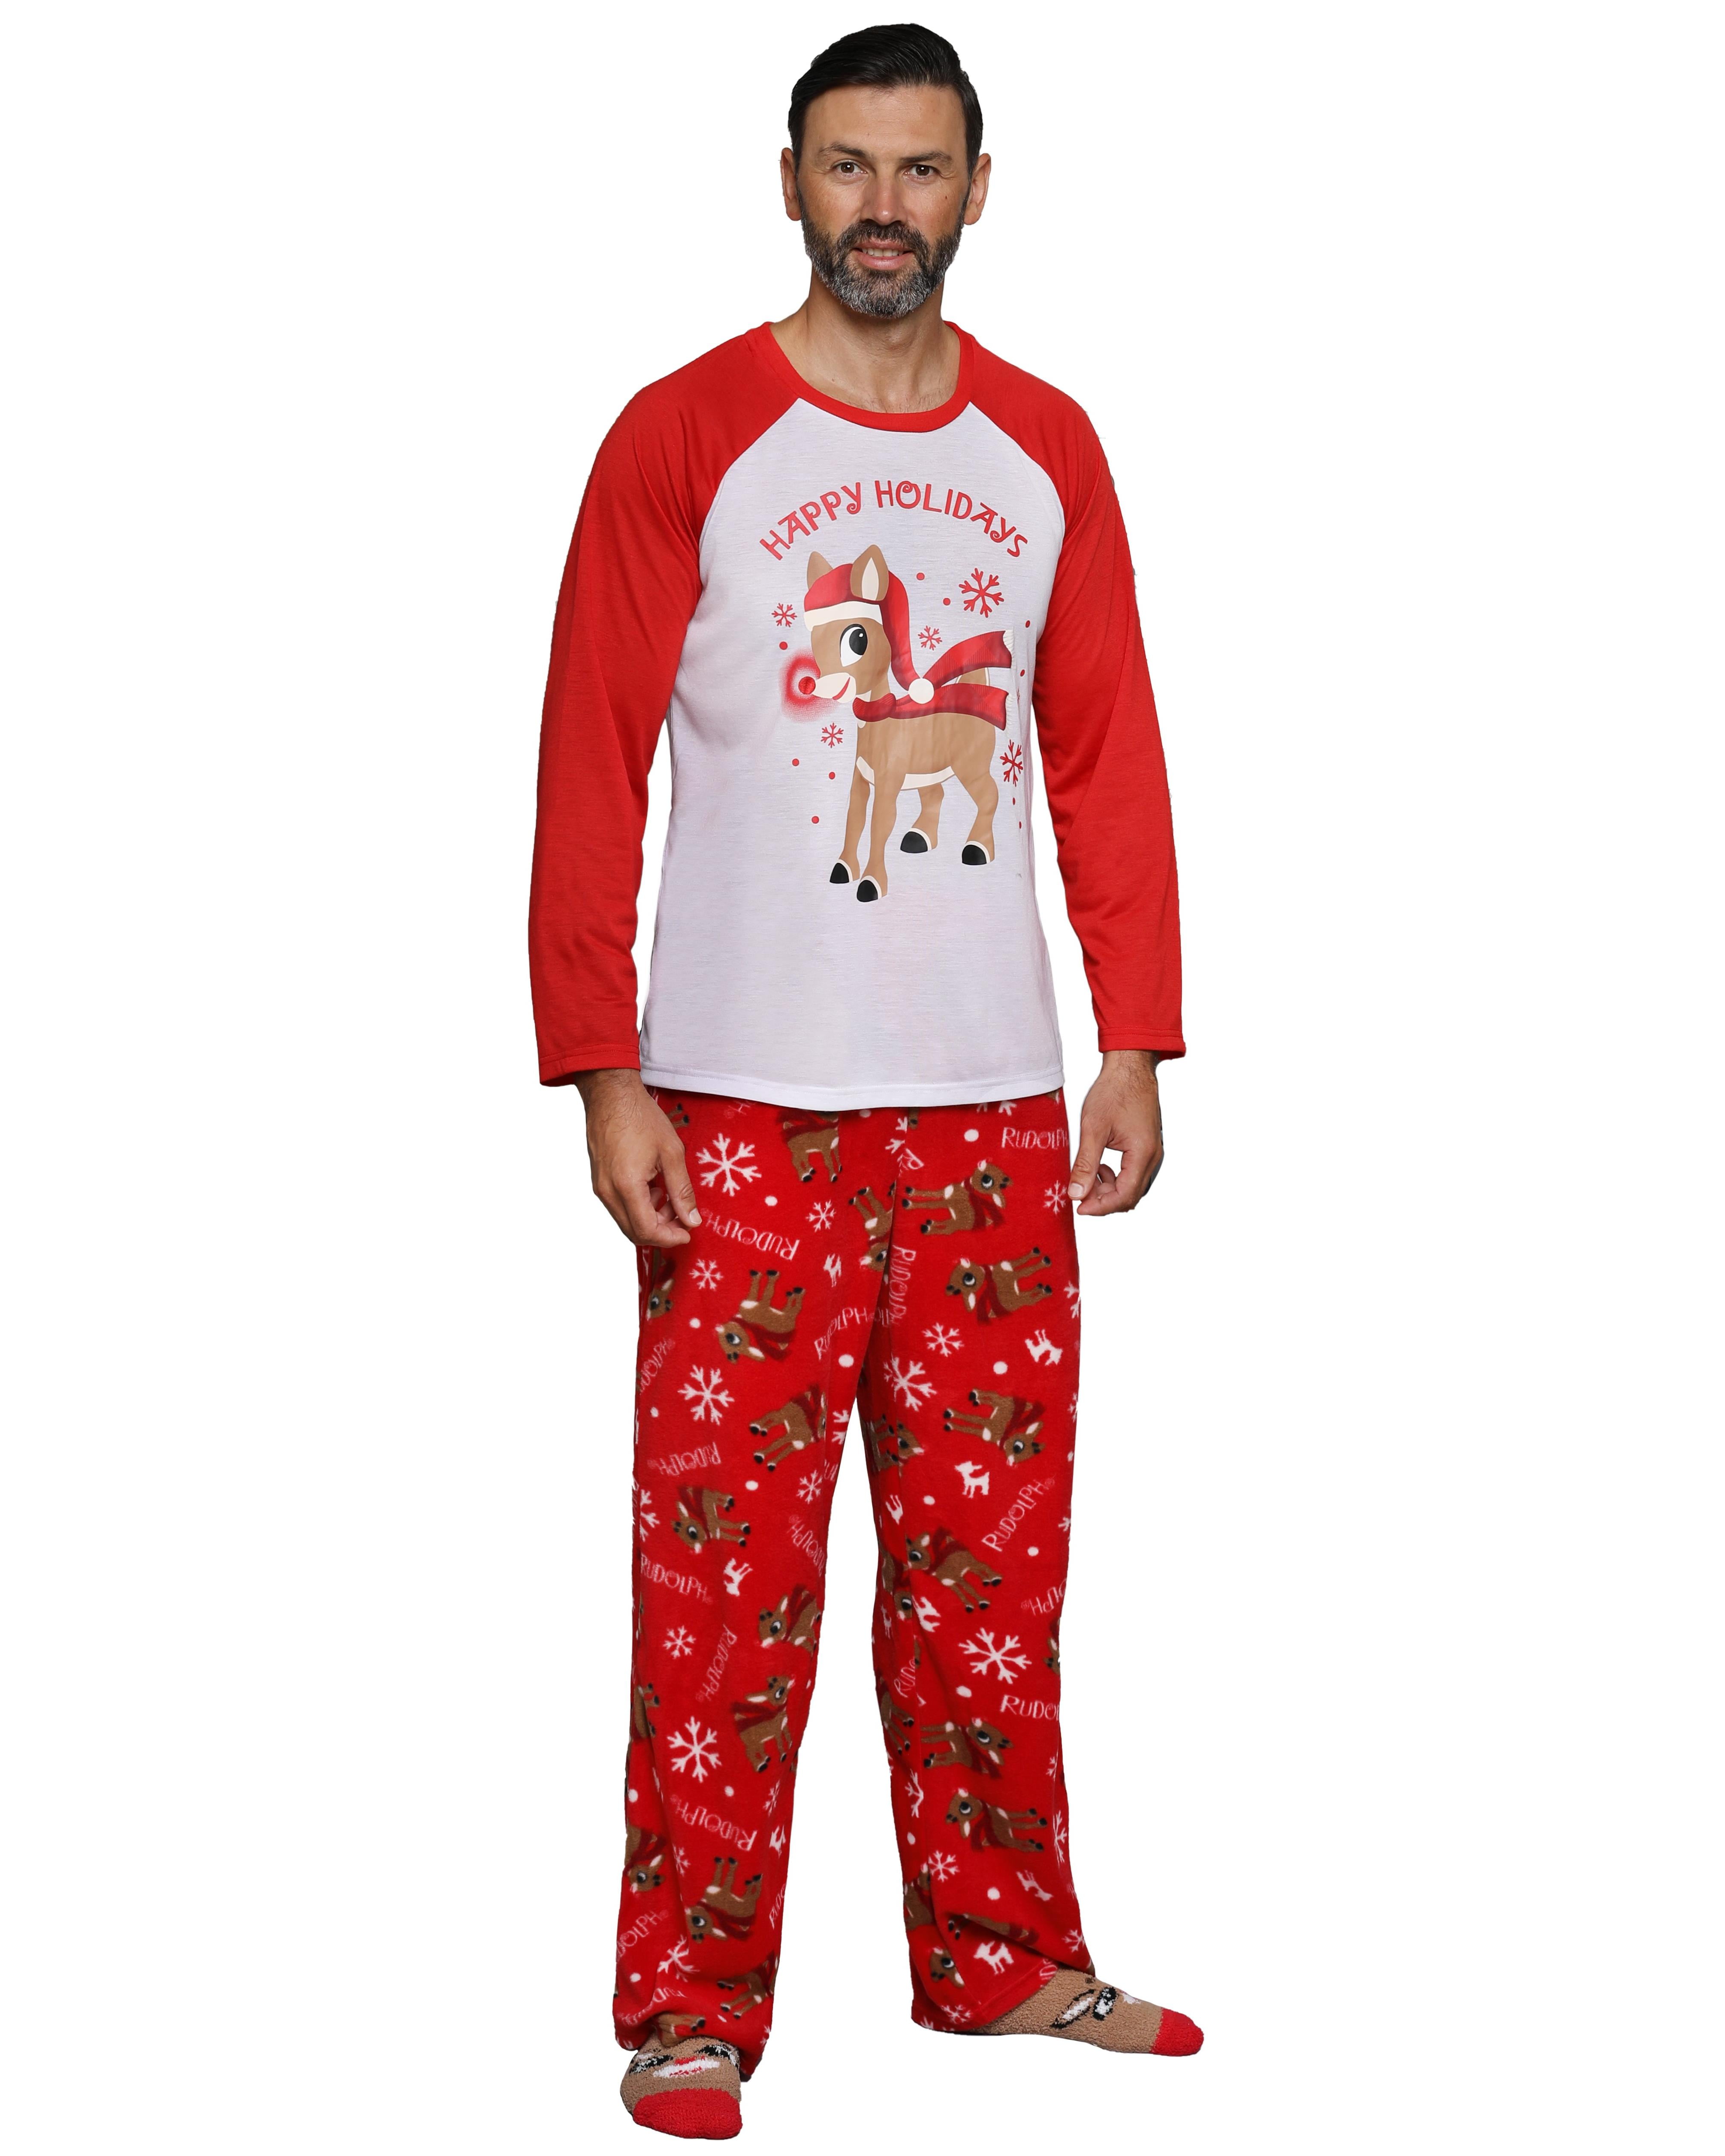 CHRISTMAS RUDOLPH THE RED NOSE REINDEER PJ PANTS SIZE S M L XL NEW! 